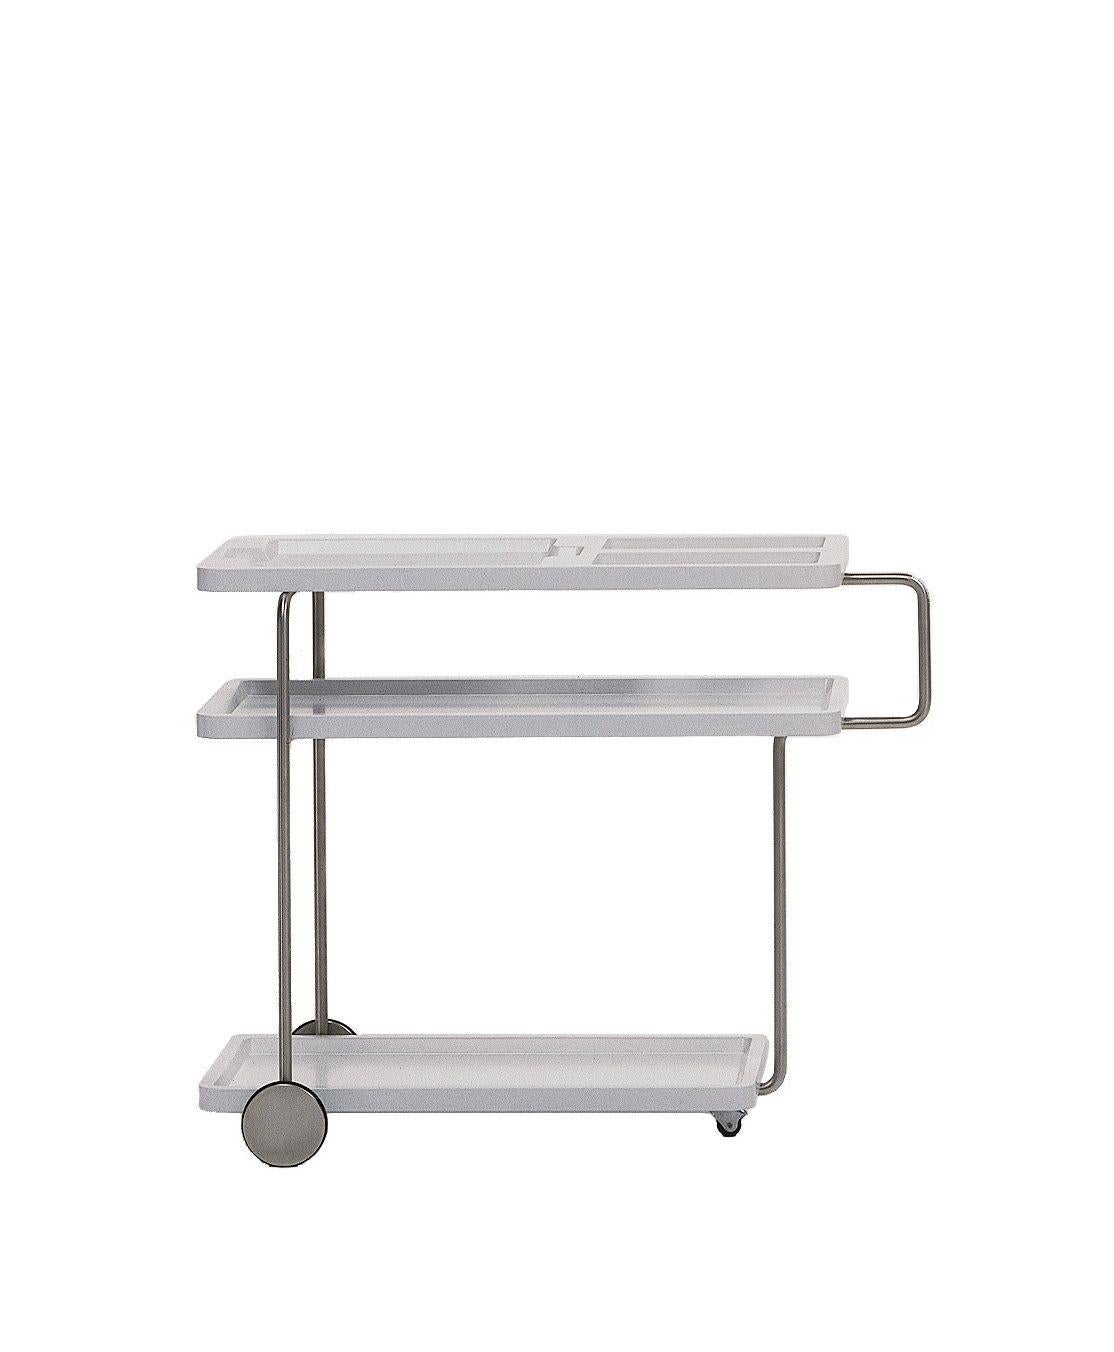 White happy hour trolley by Alfredo Häberli
Dimensions: D 43 x W 91 x H 73 cm 
Materials: Chromed iron structure. Heat-shaped ABS+PMMA plastic trays, painted with polyurethane micro-textured in matt white RAL 9003 or black RAL 9005. Back wheels in